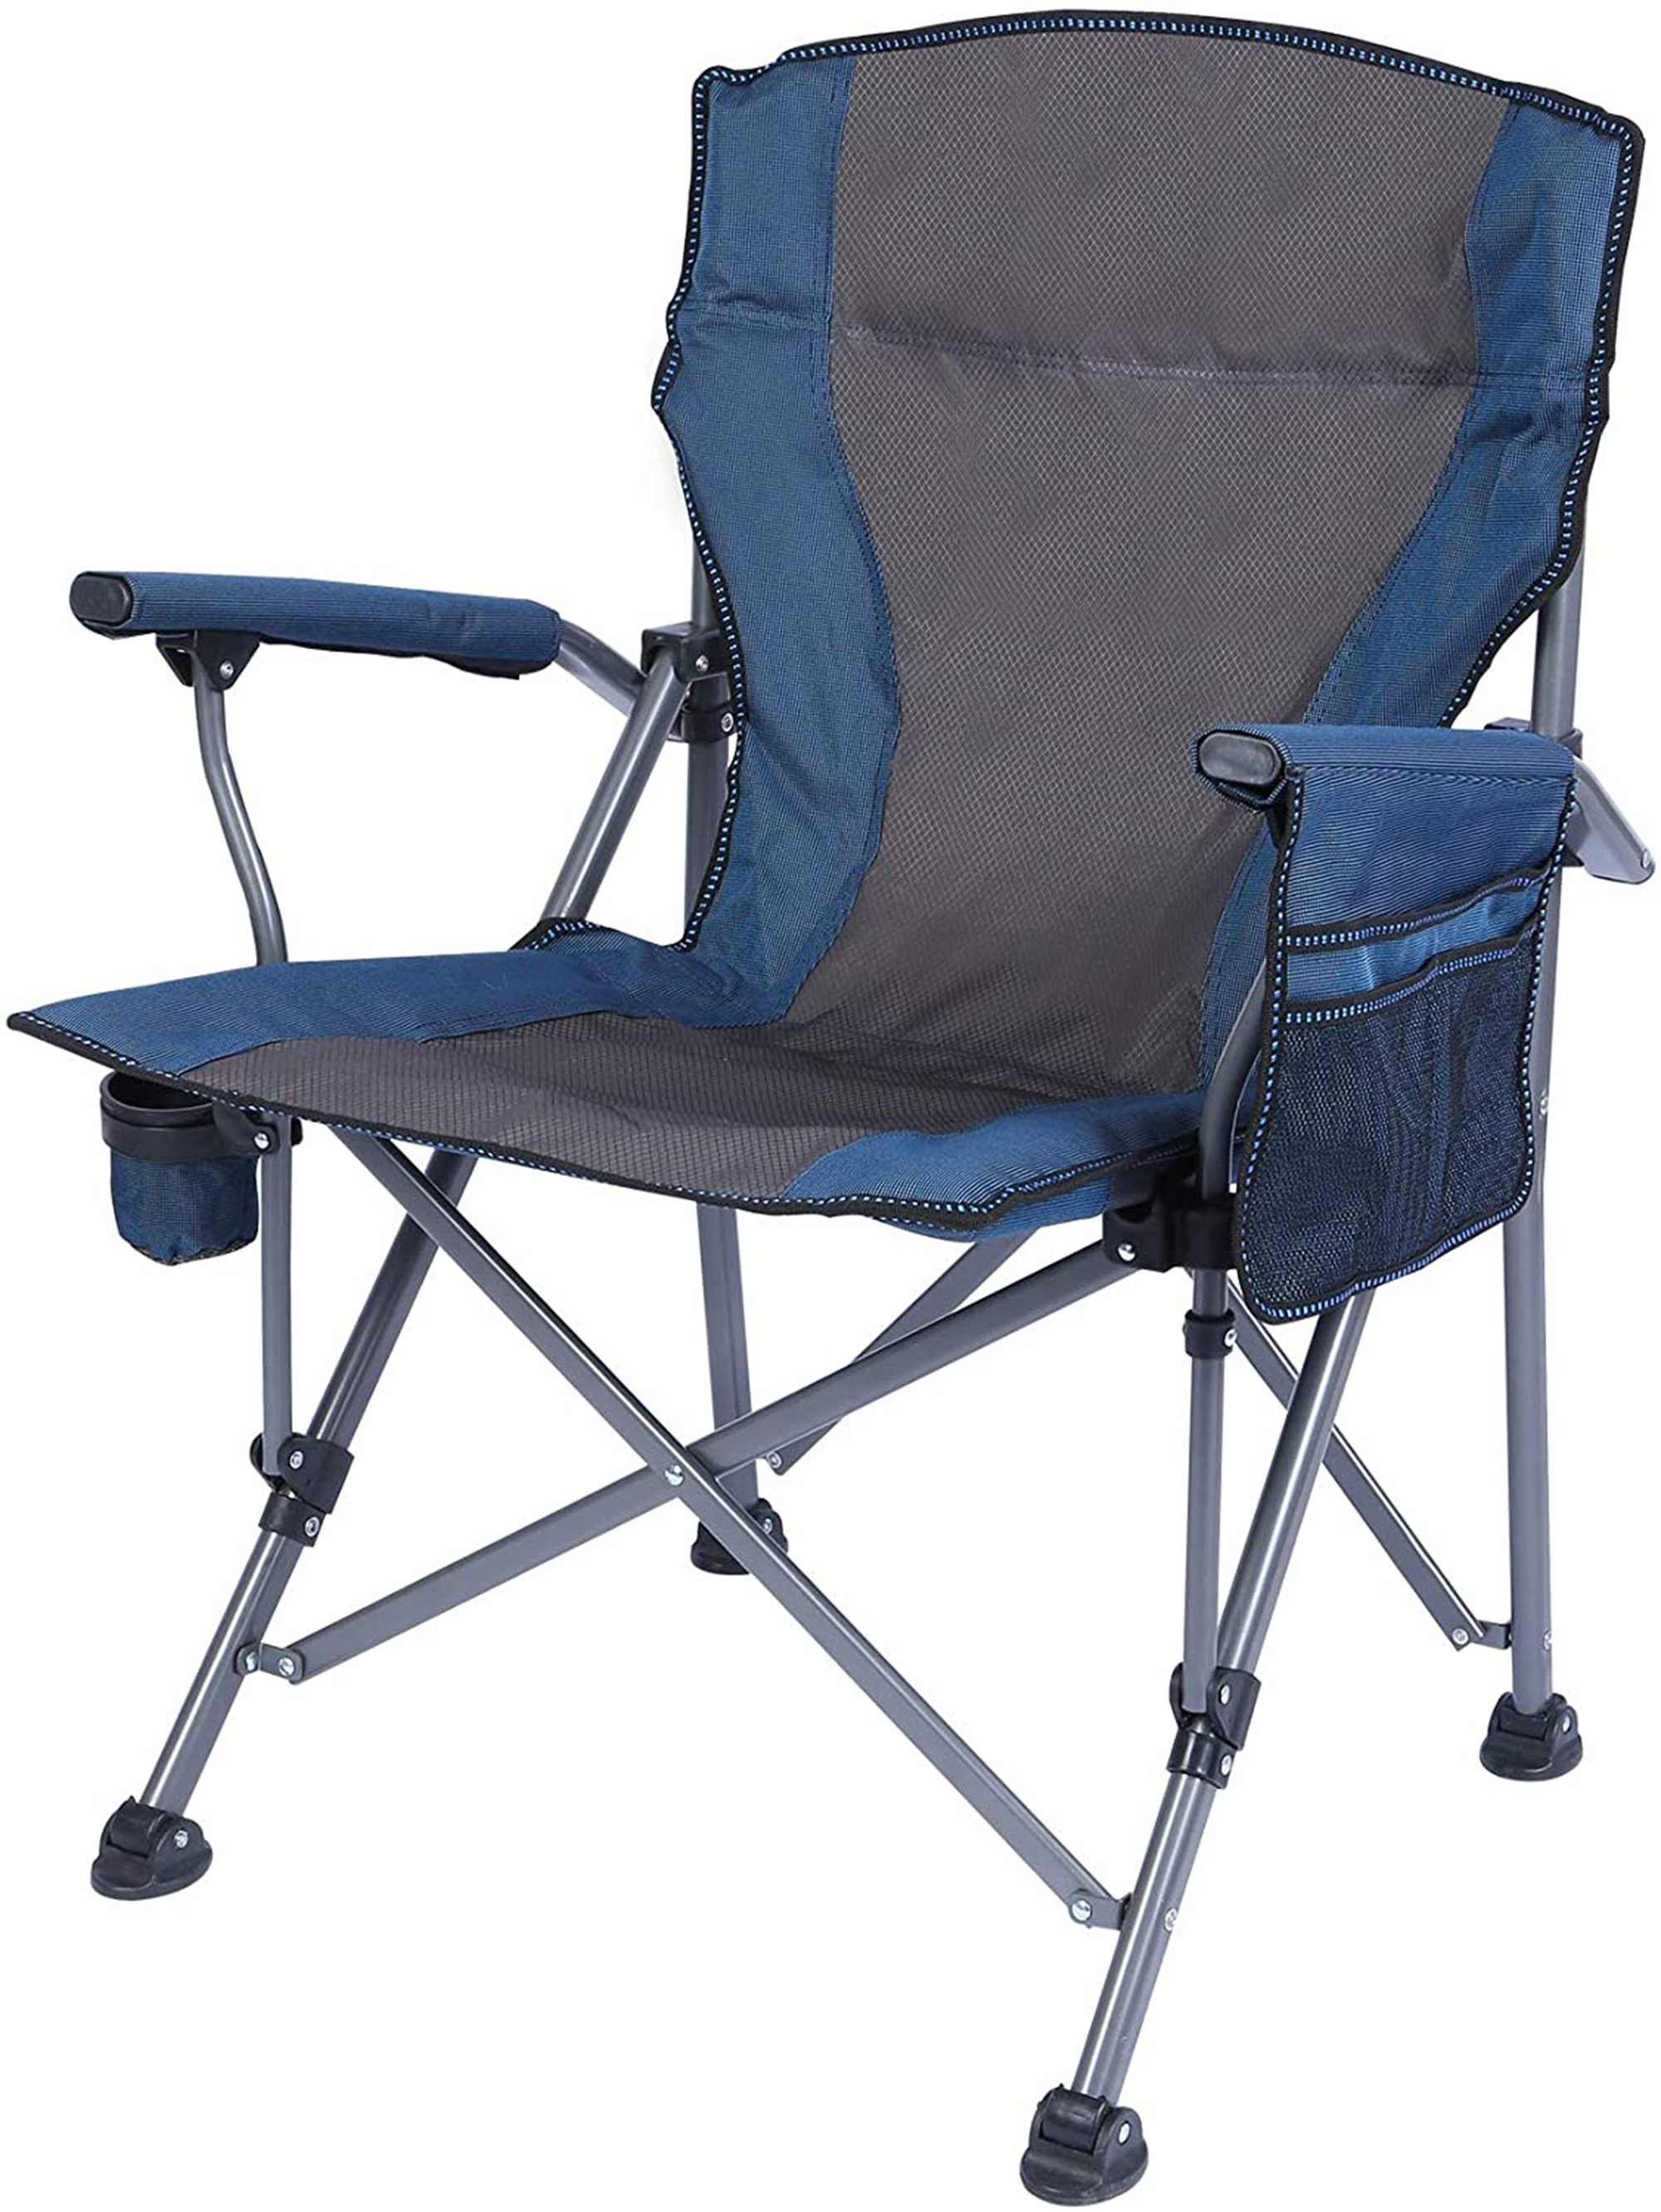 ALPHA CAMP Portable Folding Stadium Seat Bleacher Chair with Back Pad Cup  Holder